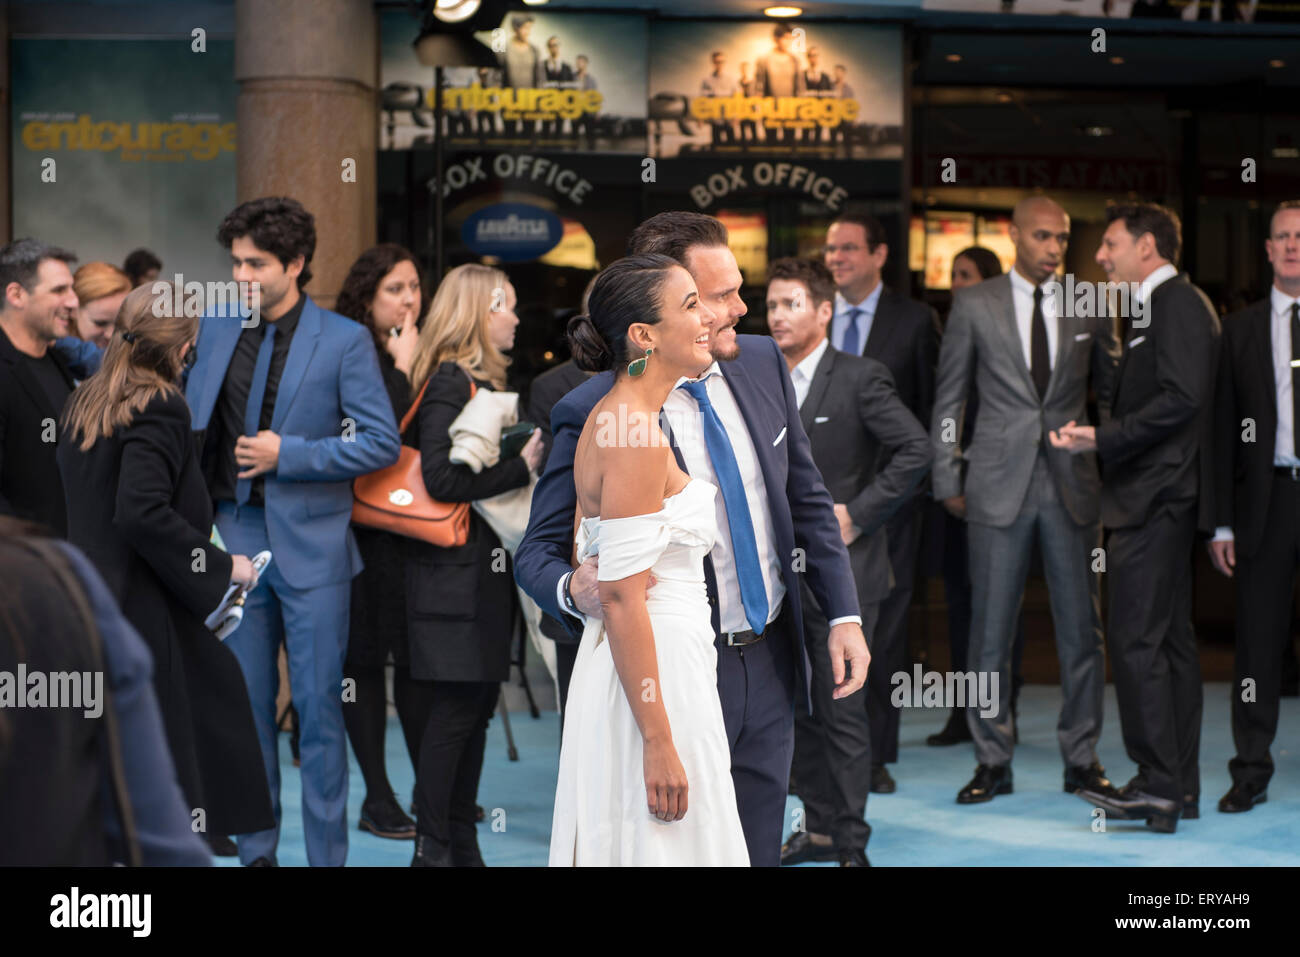 London, UK. 09th June, 2015. Kevin Dillon joins Emmanuelle Chriqui on the blue carpet for press shots against a backdrop of co-stars at the London premiere of the Entourage movie in Leicester square. Credit:  Peter Manning/Alamy Live News Stock Photo